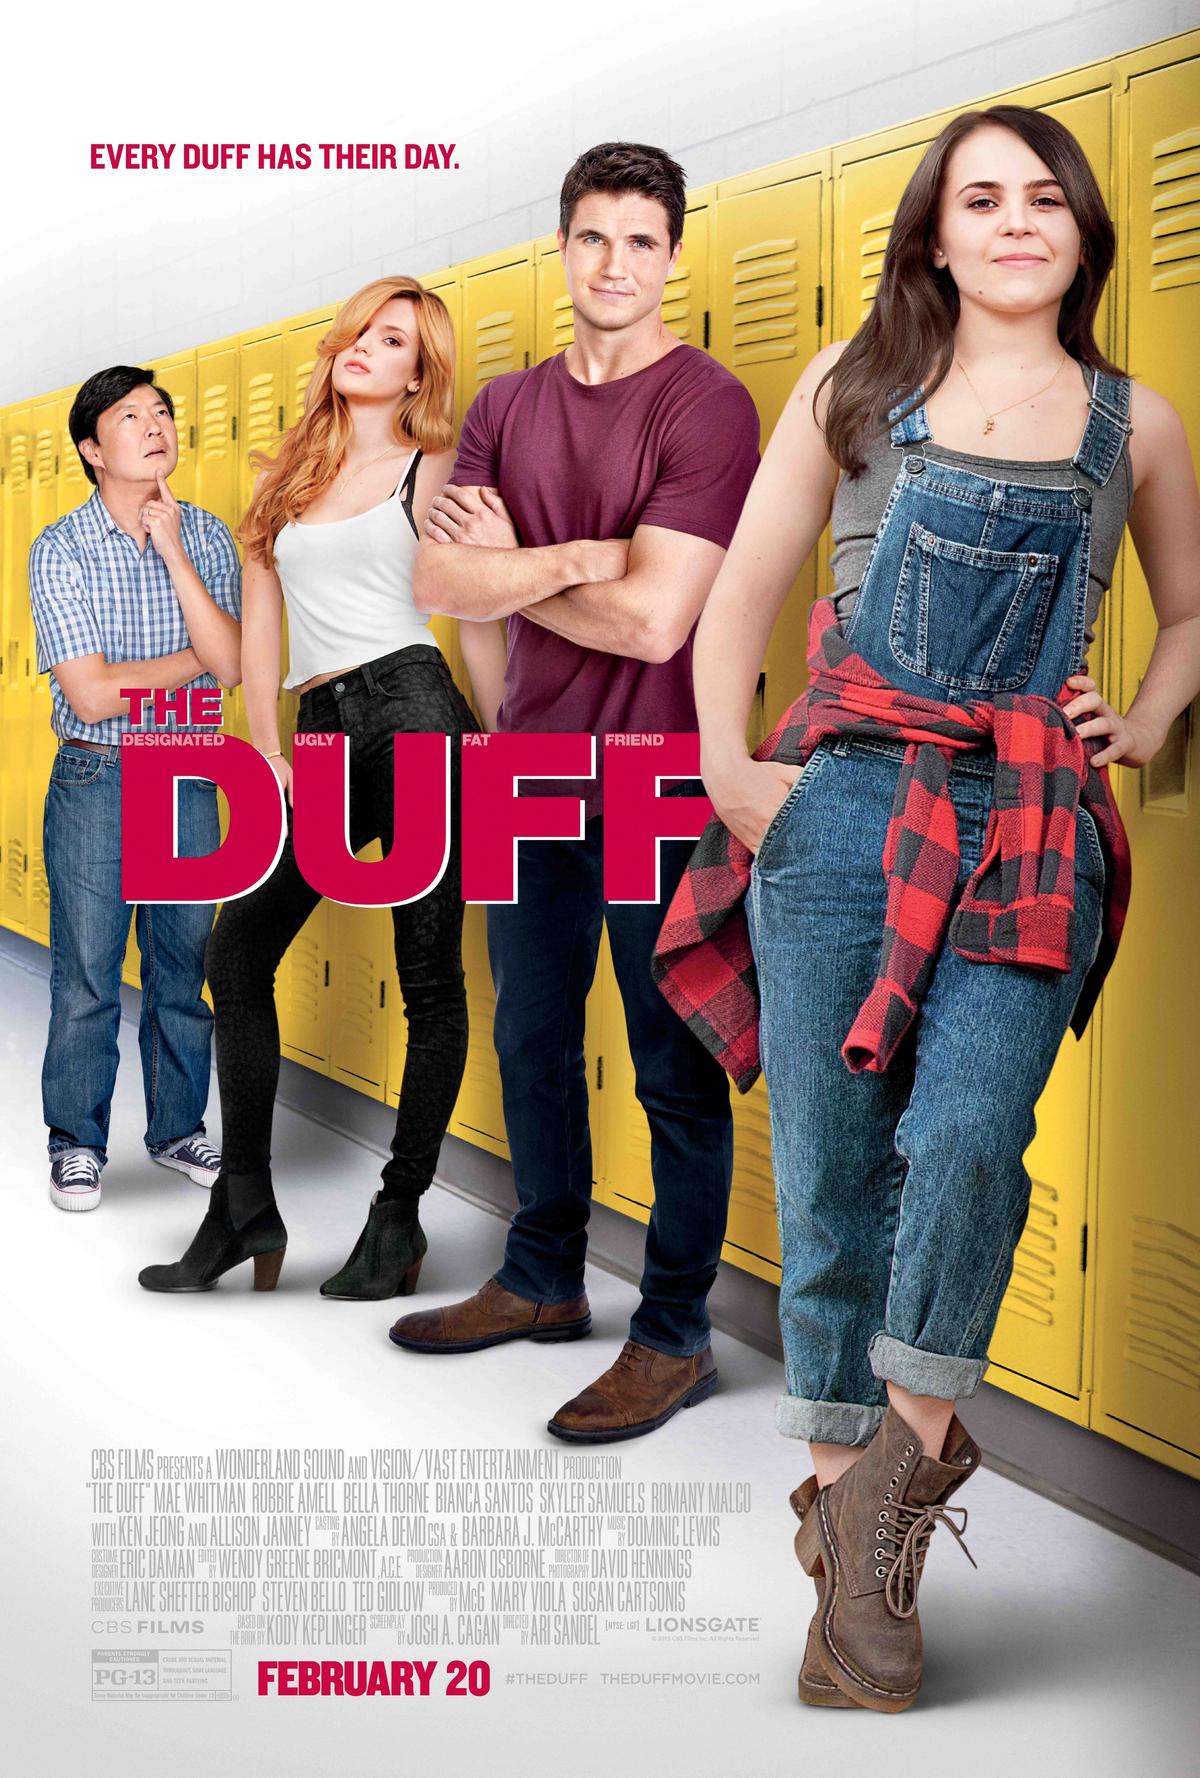 Movie poster for "The DUFF."